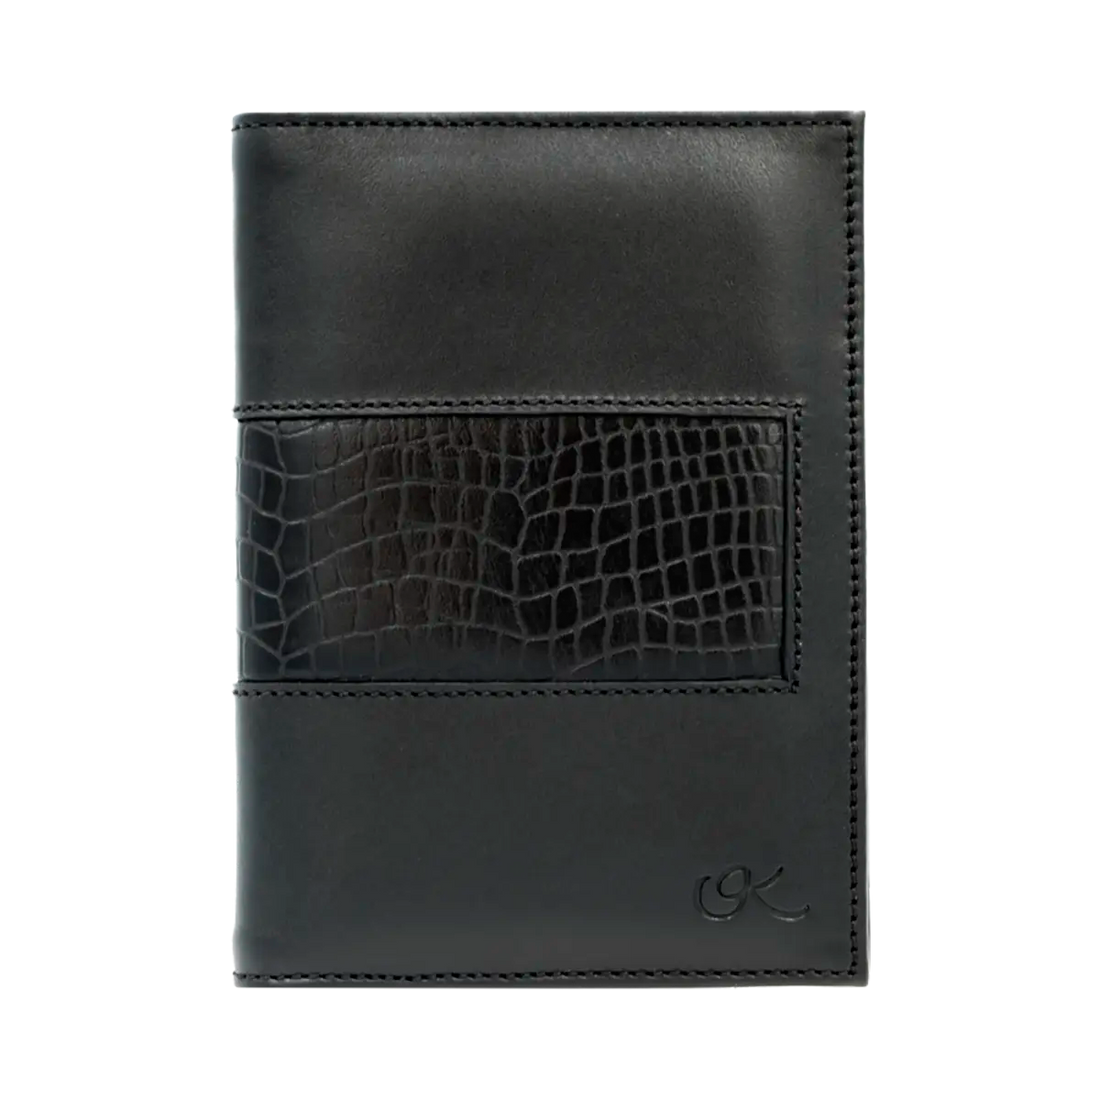 black leather passport holder with detail print. Fashion travel accessory for women. Shop in San Diego, CA.